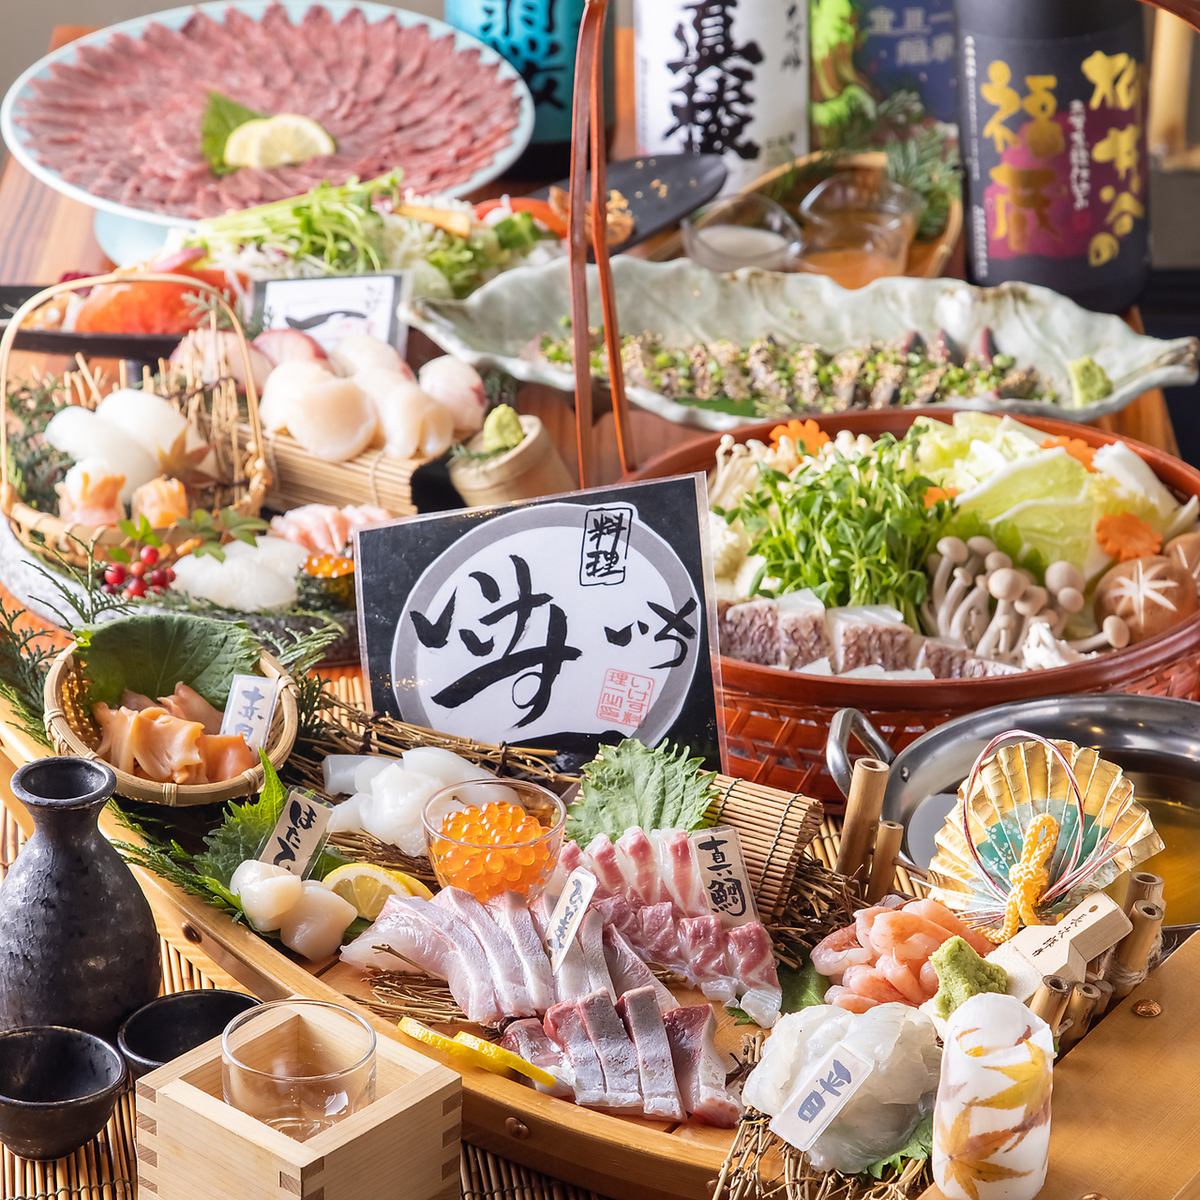 A Japanese izakaya where you can enjoy dishes made with fresh live fish!